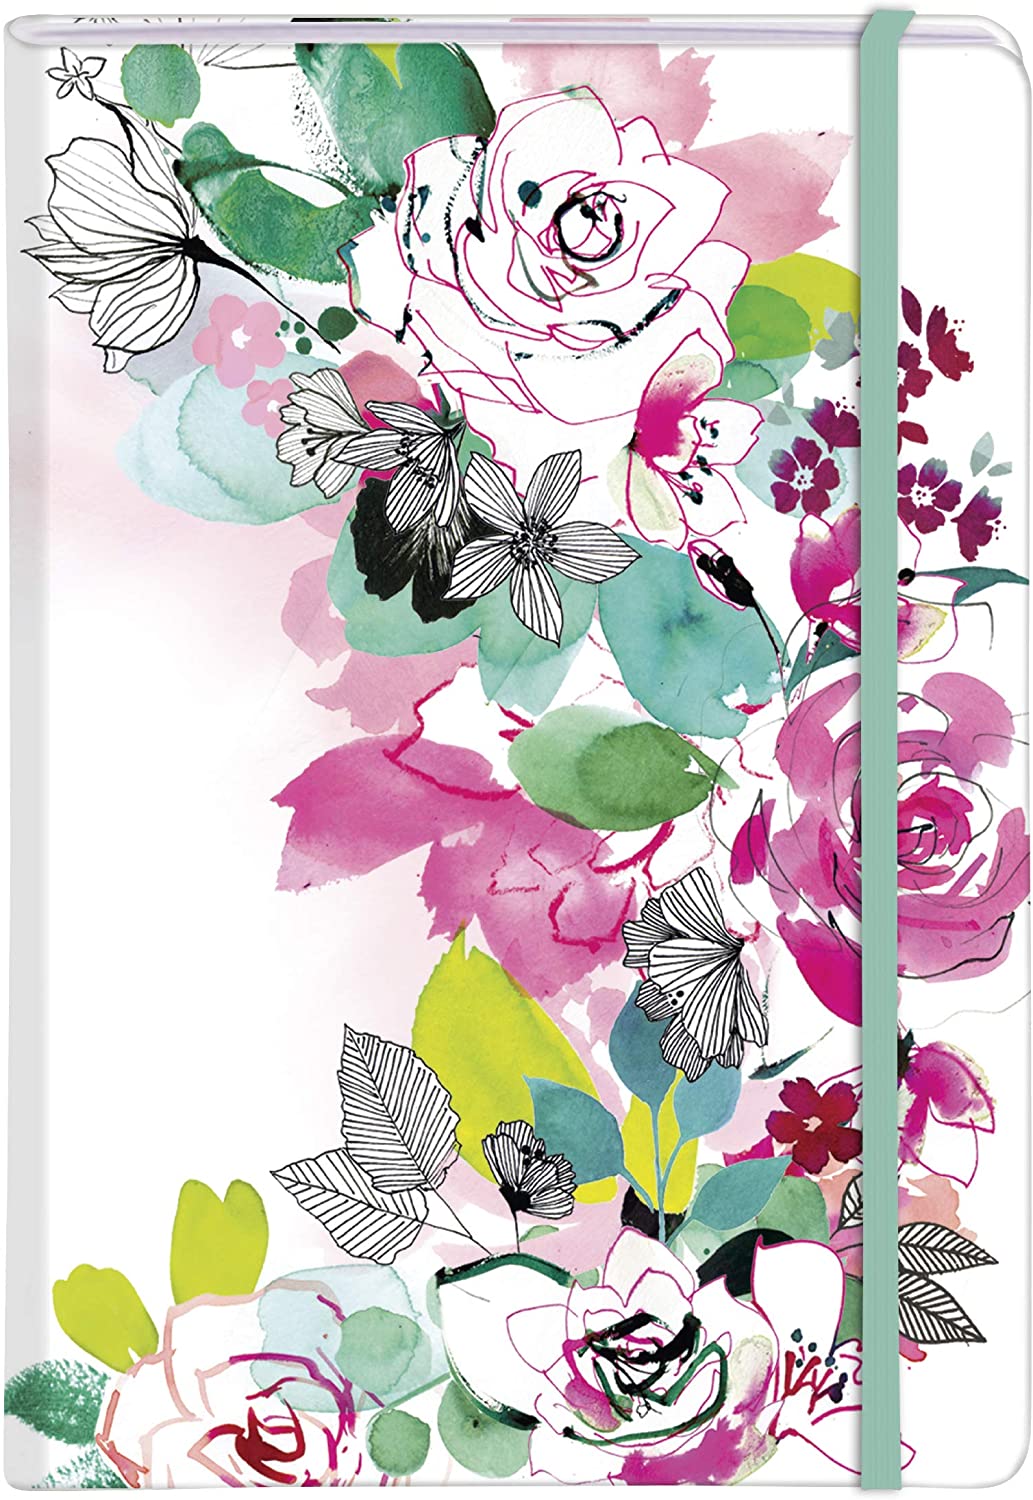 Clairfontaine Blooming Hardback Floral Lined Notebook A5, book chosen at random.  Beautifully illustrated, with spot varnish. Design by Élise Demozay